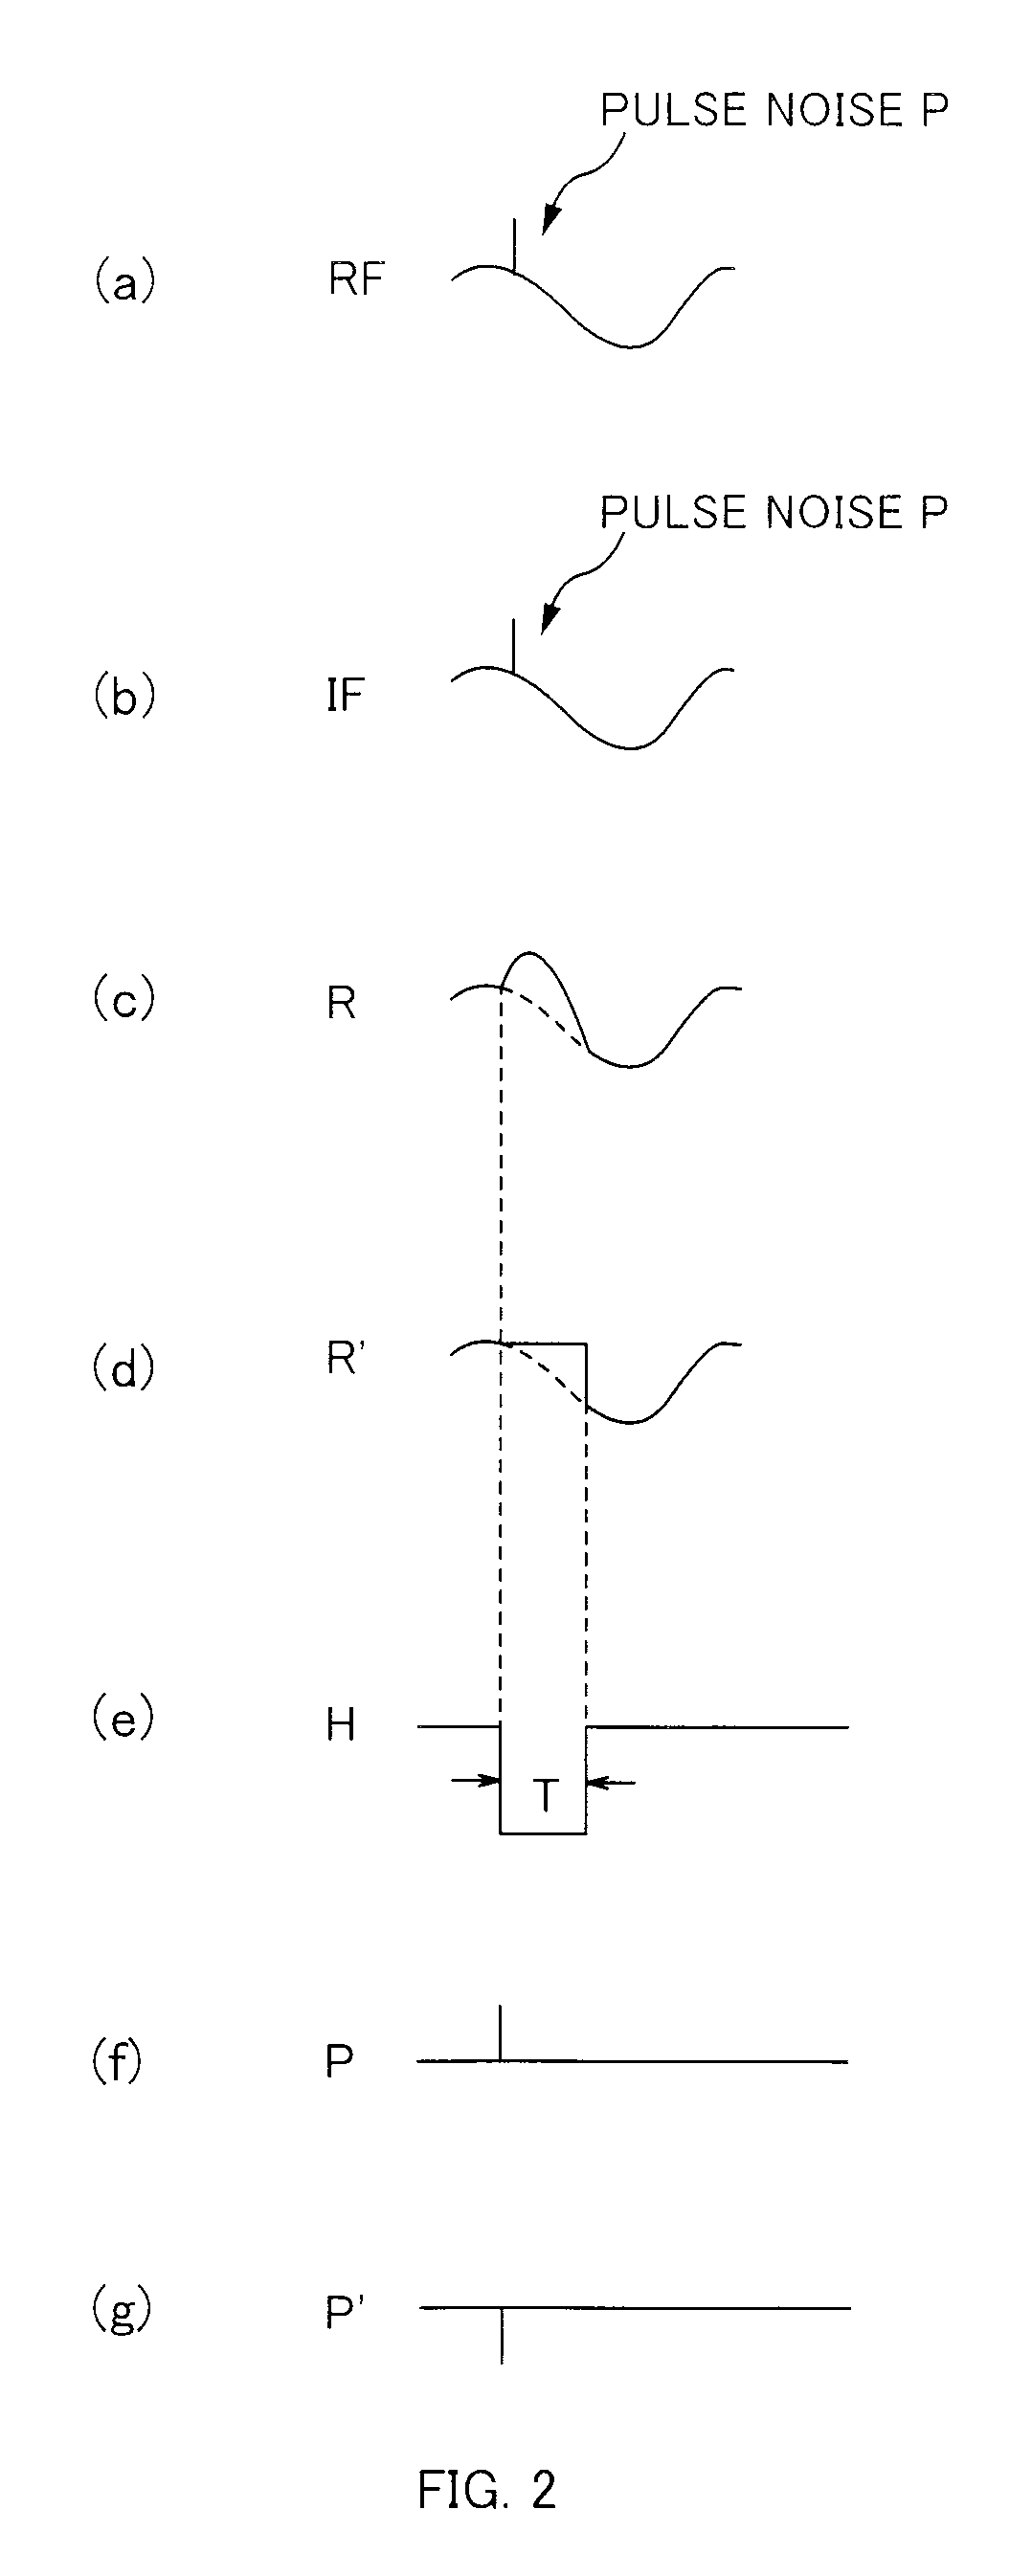 Noise Canceller and AM Receiving Apparatus Using the Same